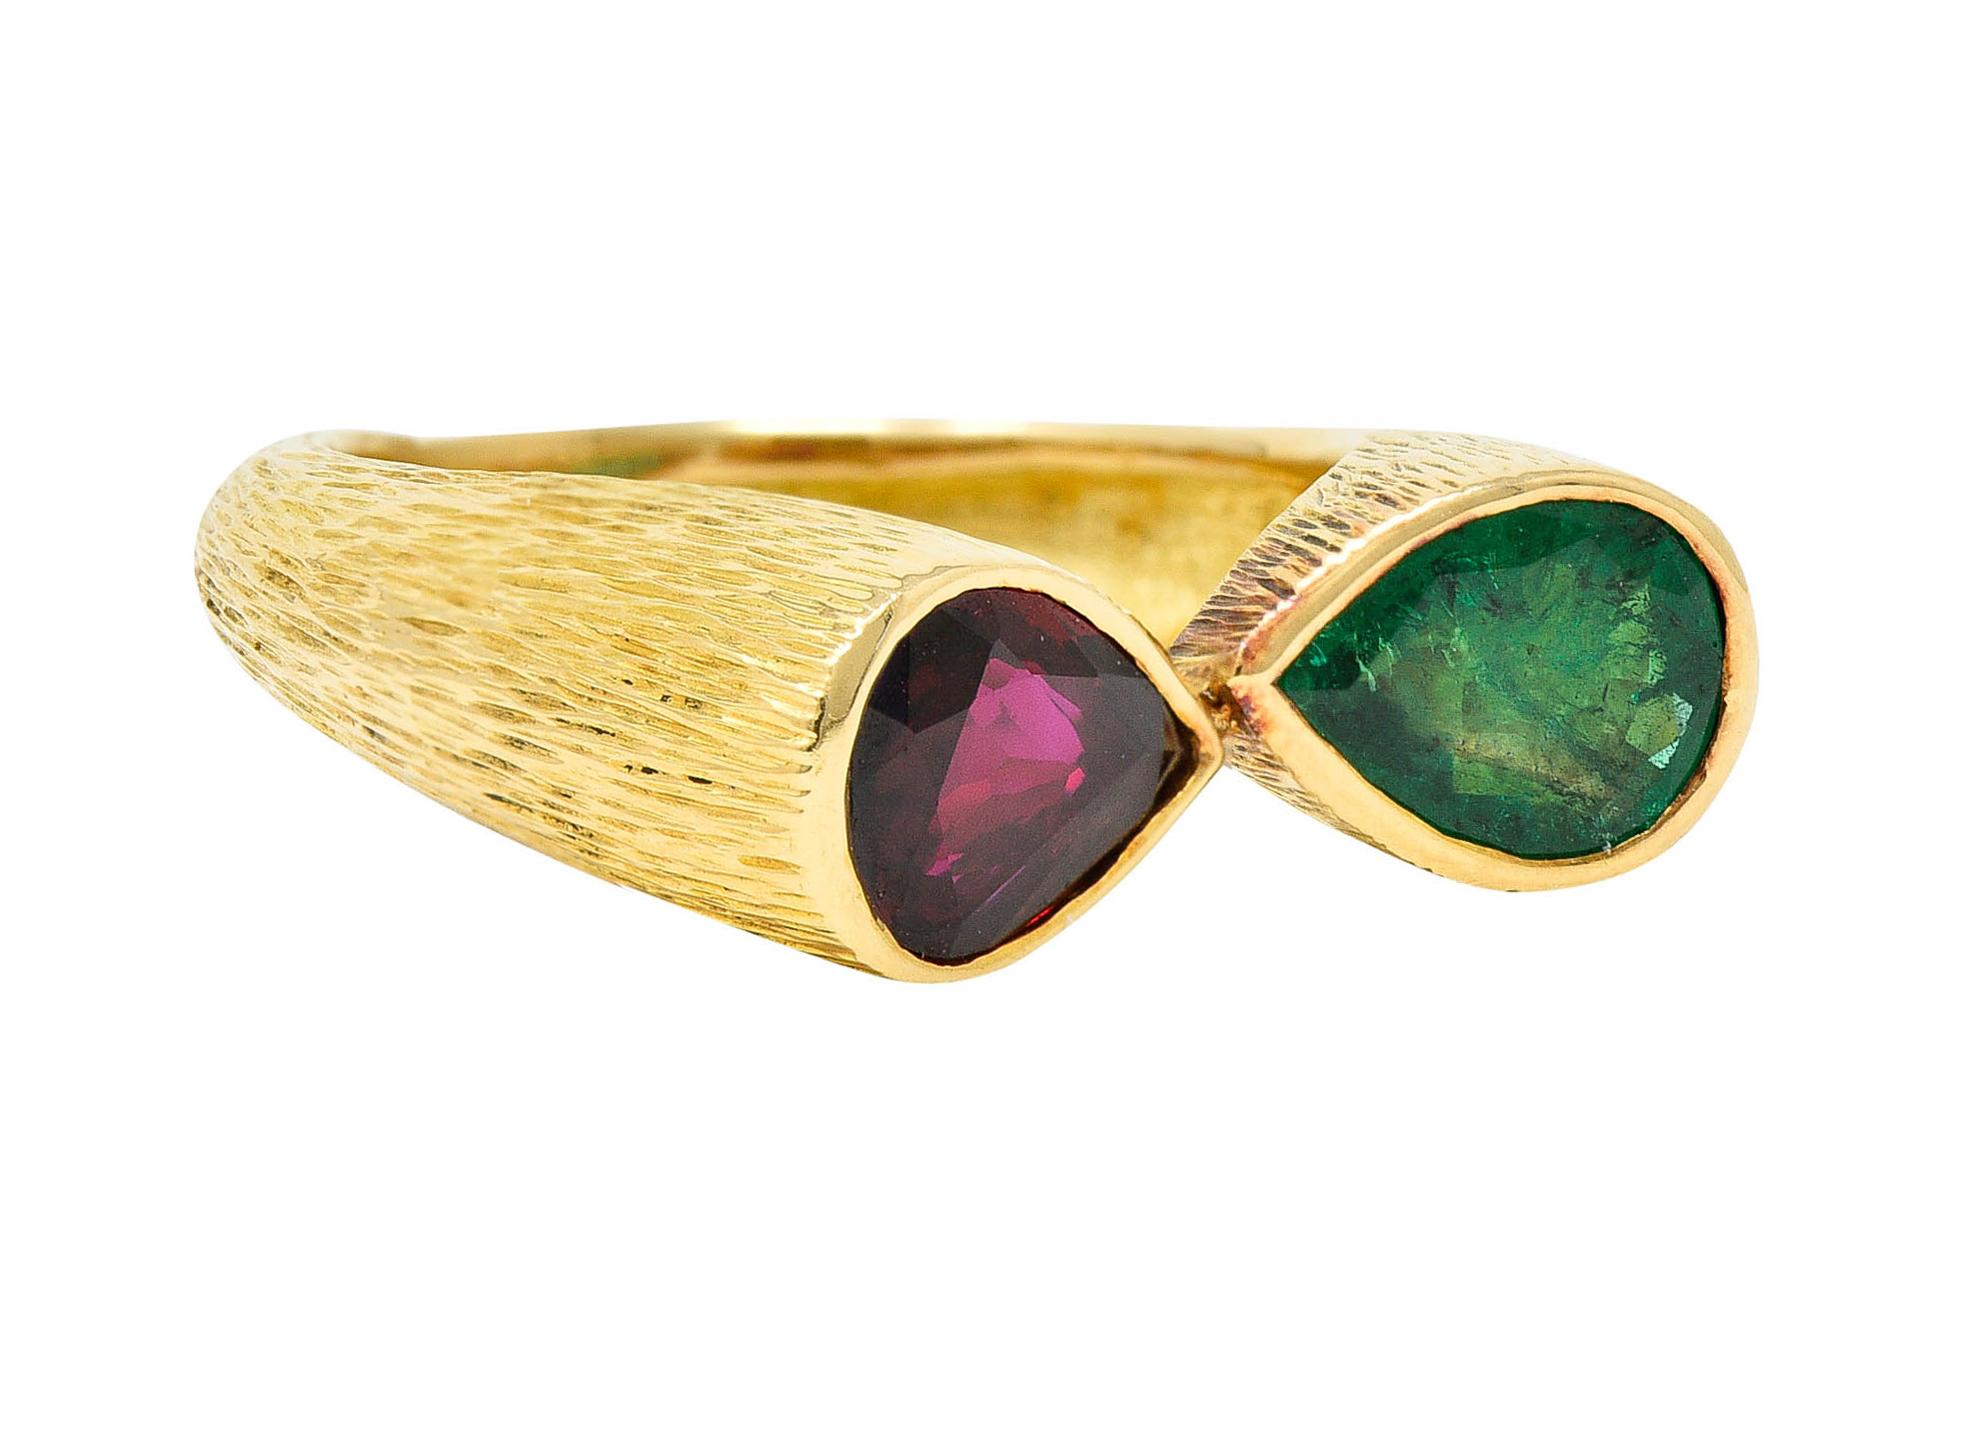 Highly textured ring features two pear cut gemstones - bezel set and mirroring one another

Emerald is vibrantly green and semi-transparent with natural inclusions while weighing 0.84 carat

Ruby is strikingly transparent with medium dark red color